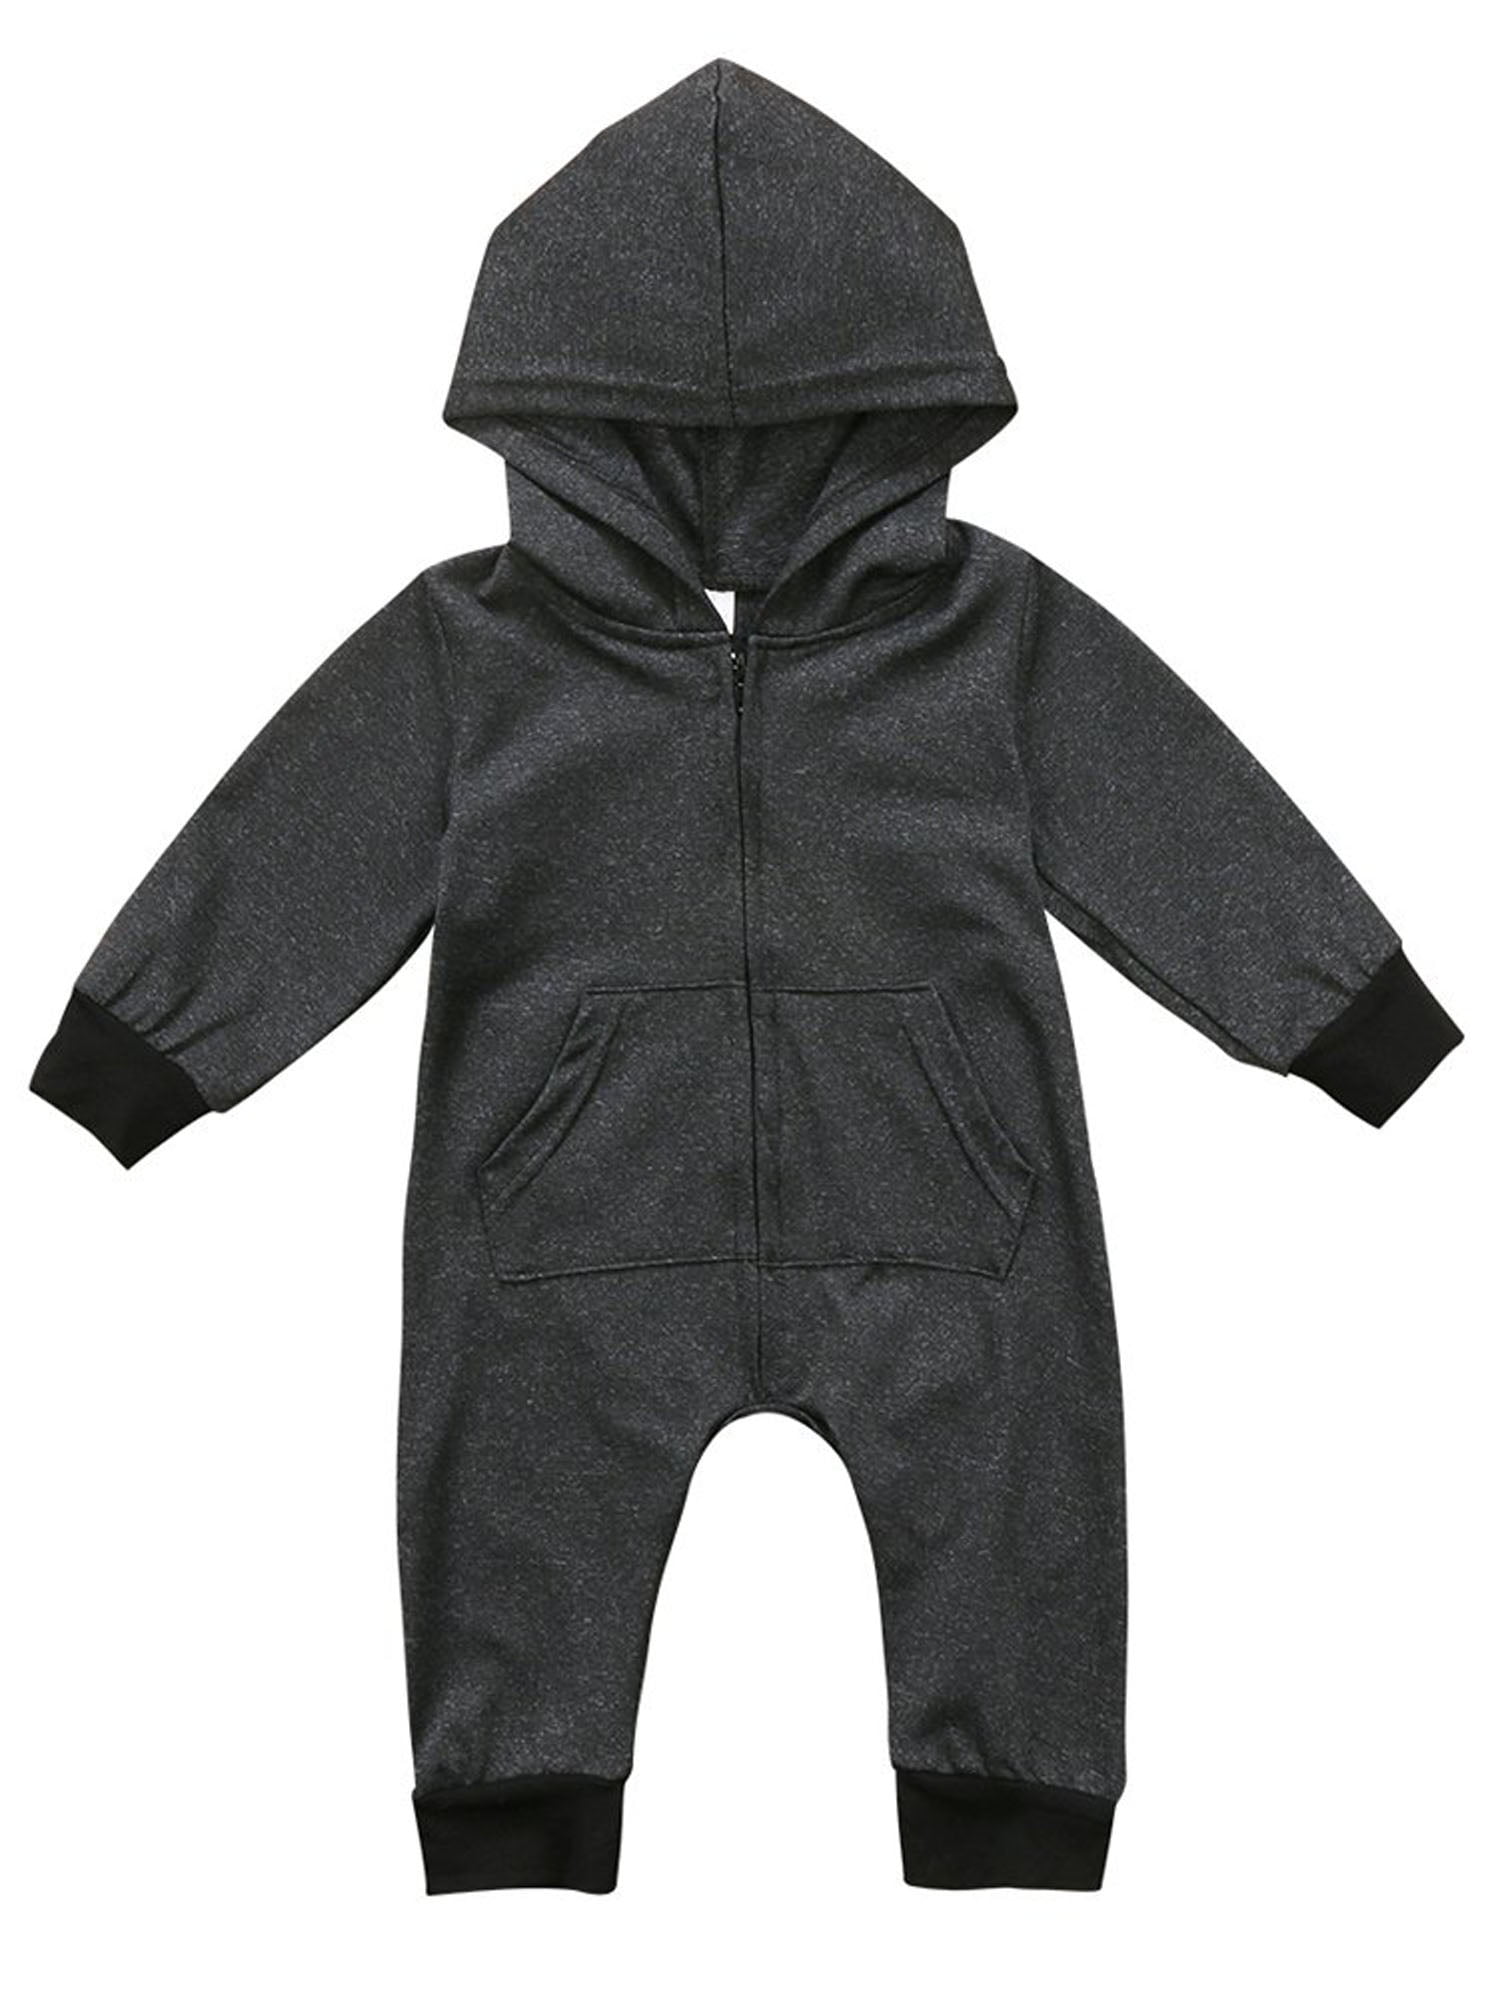 Details about   Infant Newborn Baby Boys Girls Hooded Romper Jumpsuit Playsuit Clothes Outfit 